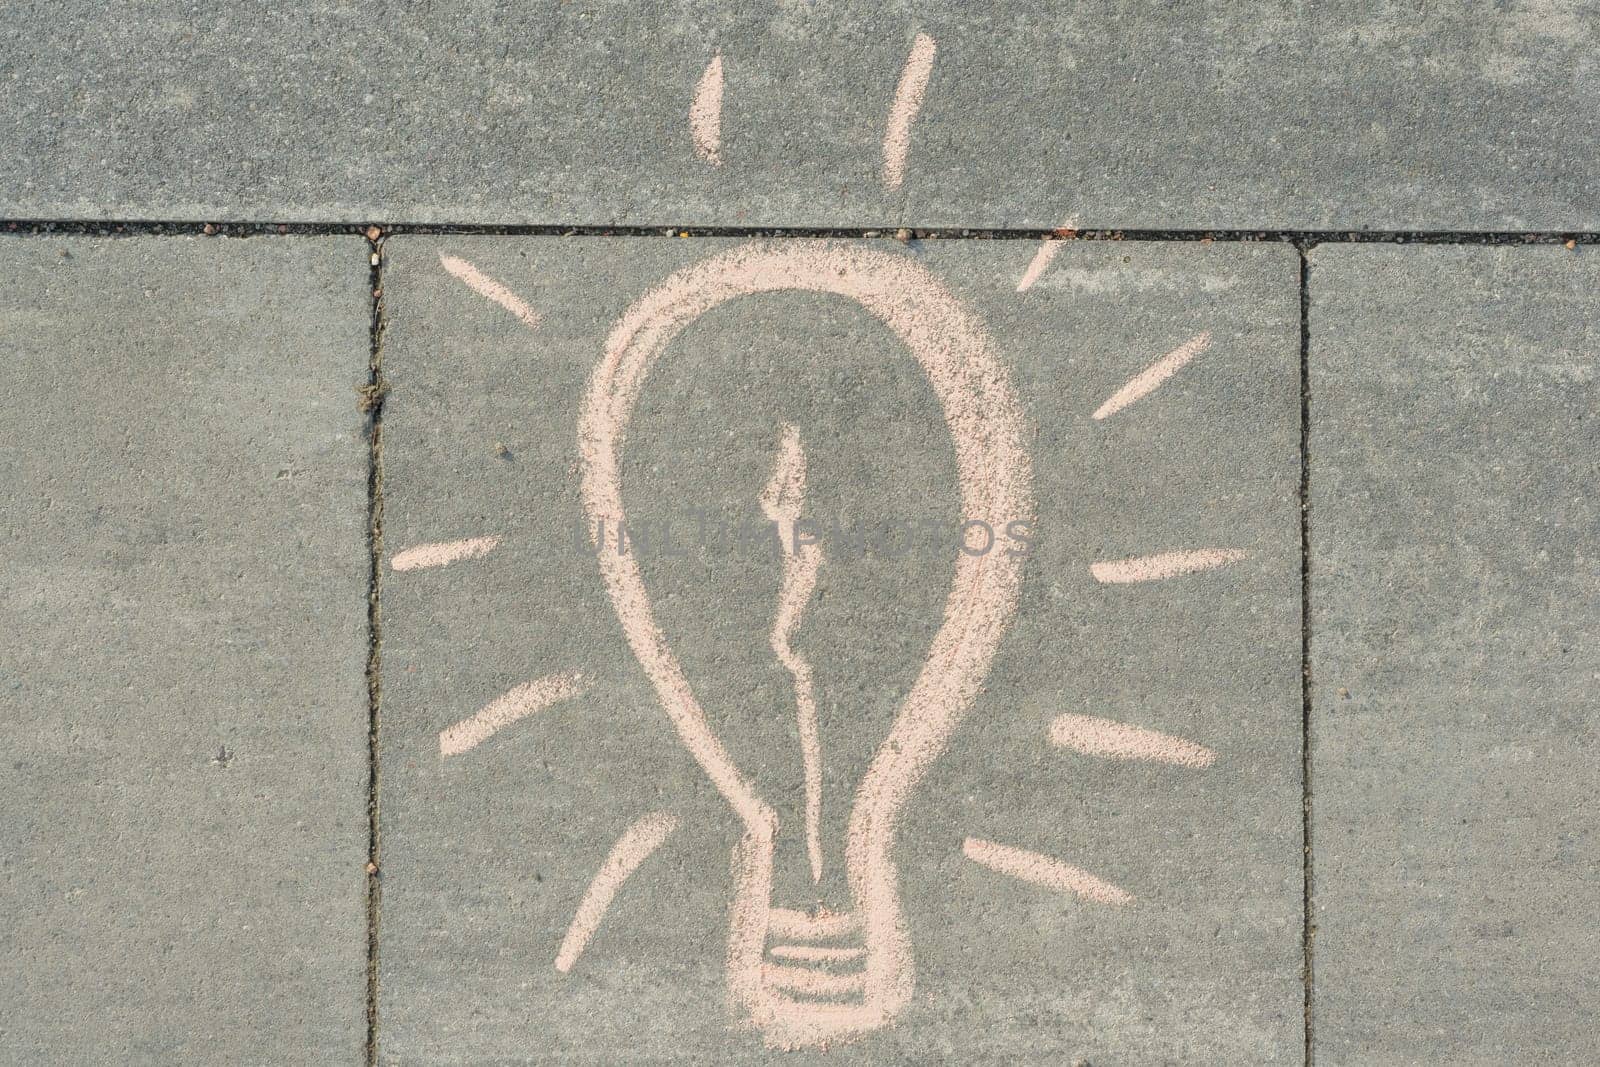 Abstract image drawing of light bulb written on grey sidewalk.